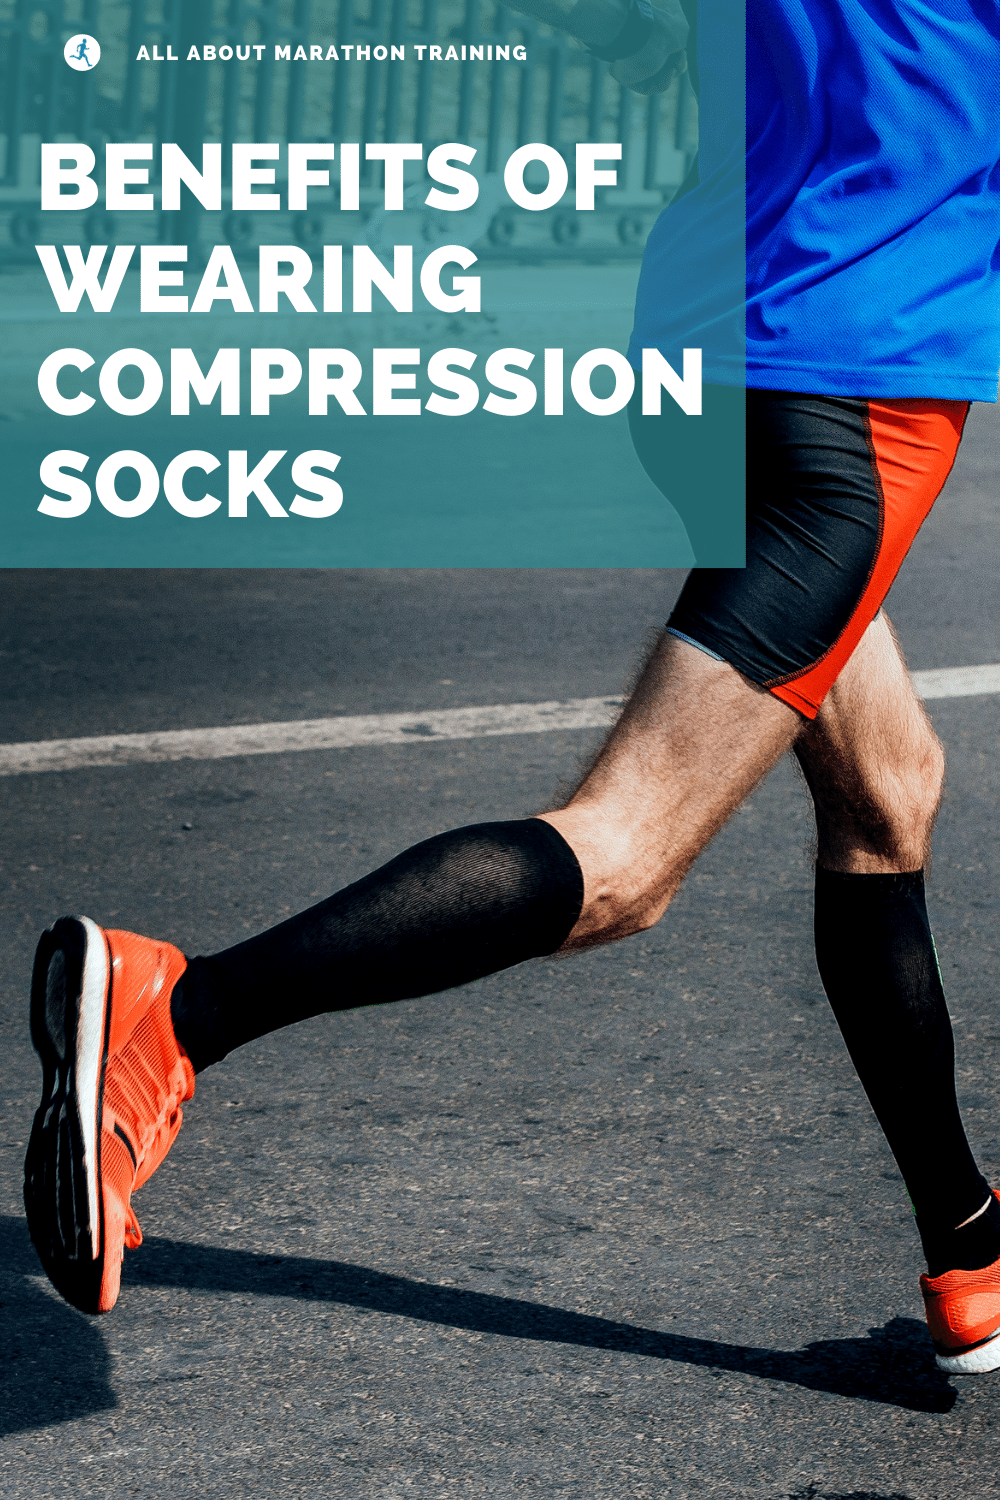 Should you wear compression socks during or after a run or workout